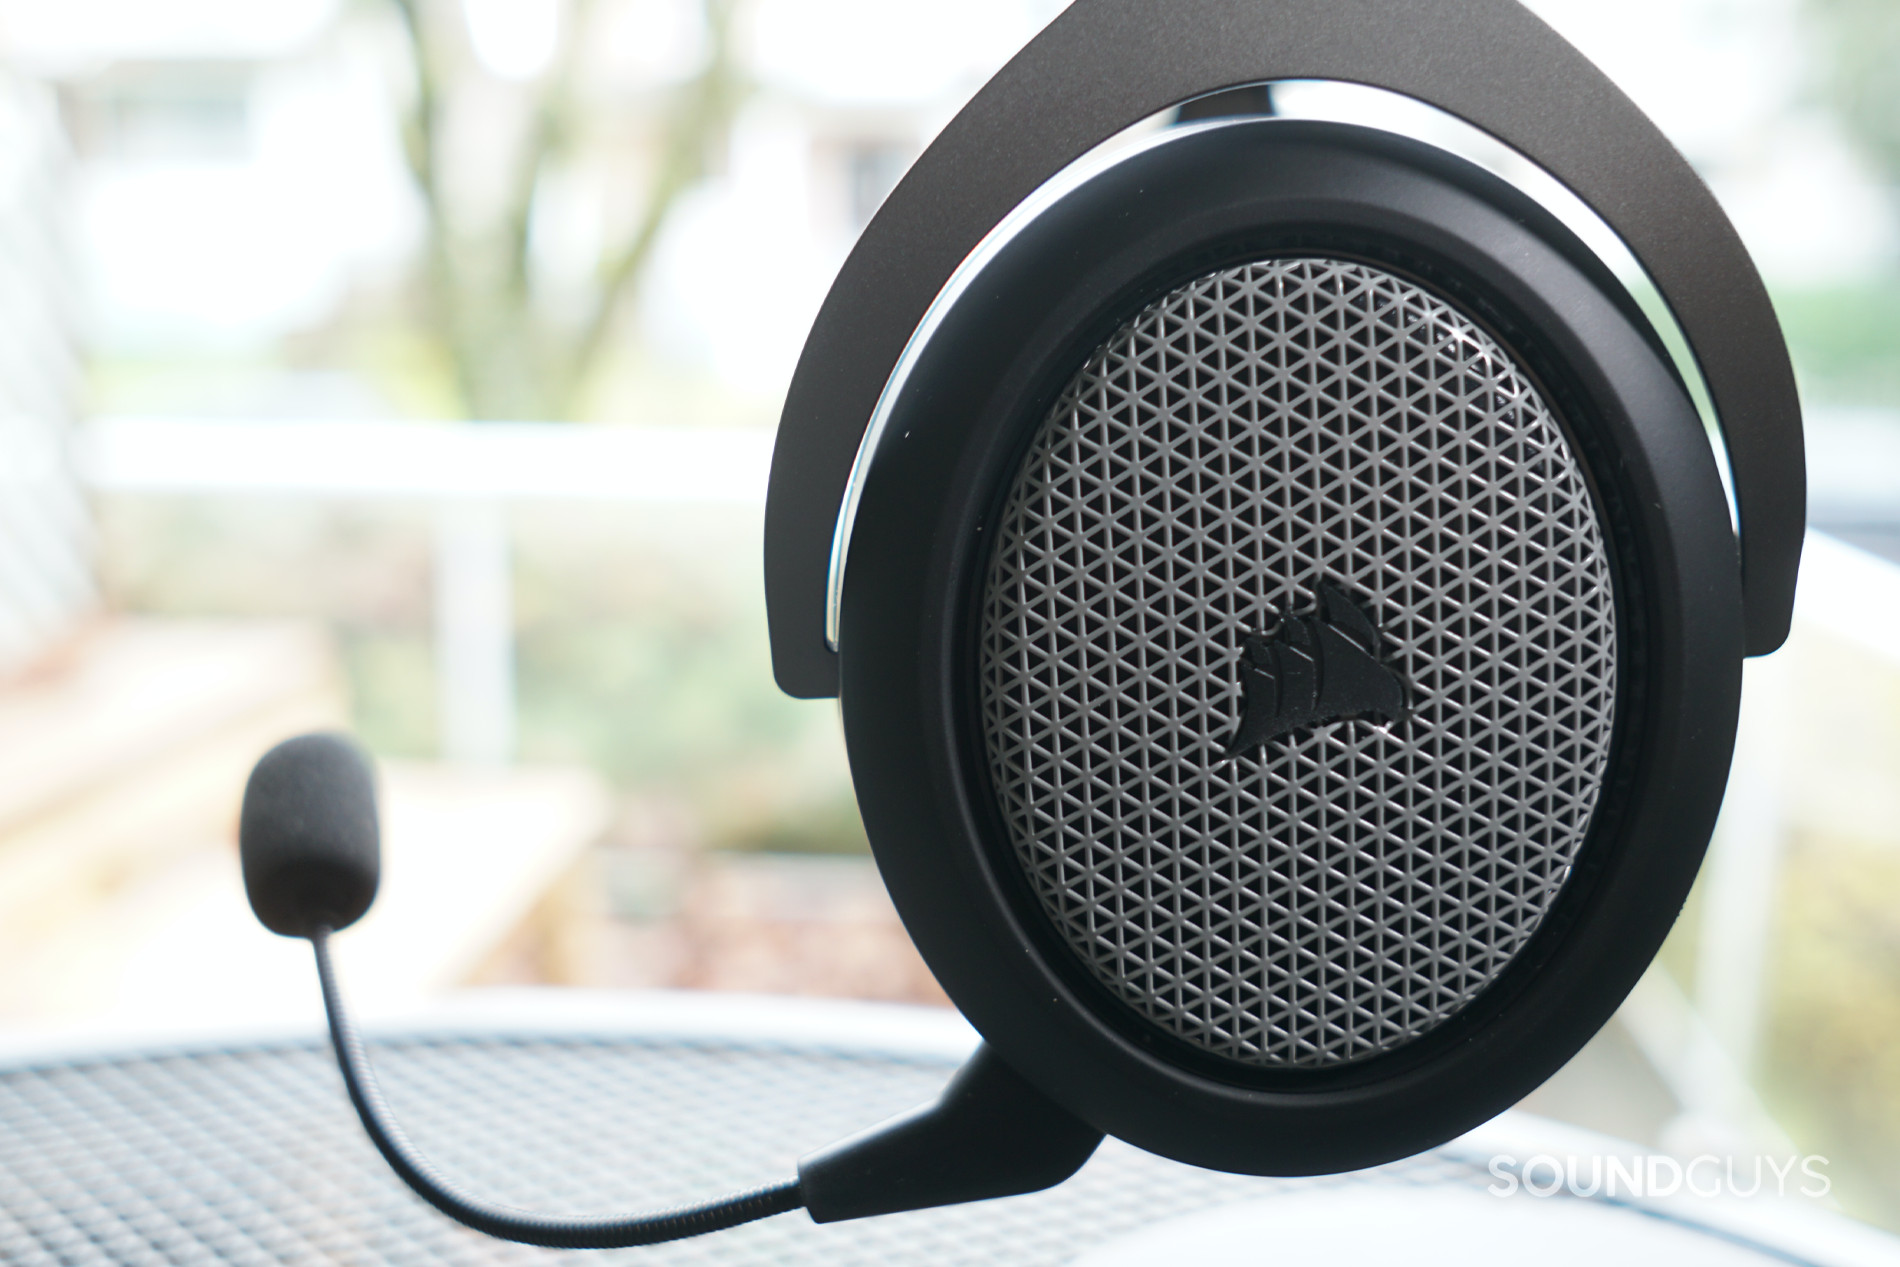 A close shot of the Corsair HS75 XB Wireless gaming headset's left headphone, with the mic attached.